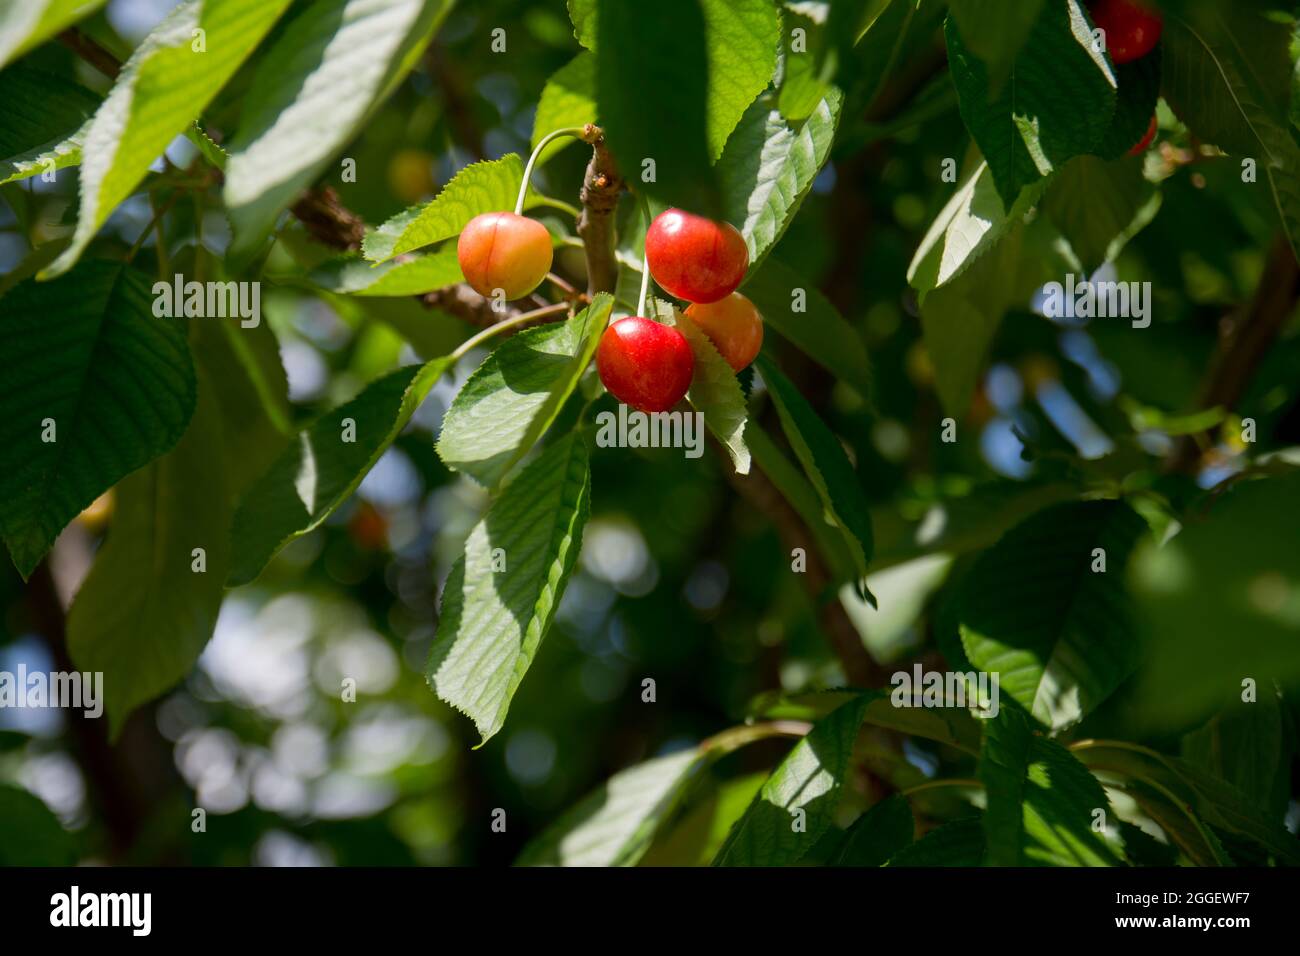 Unripe cherries on the Spring Branch. yellow and slightly reddened. Selective Focus Cherry Stock Photo